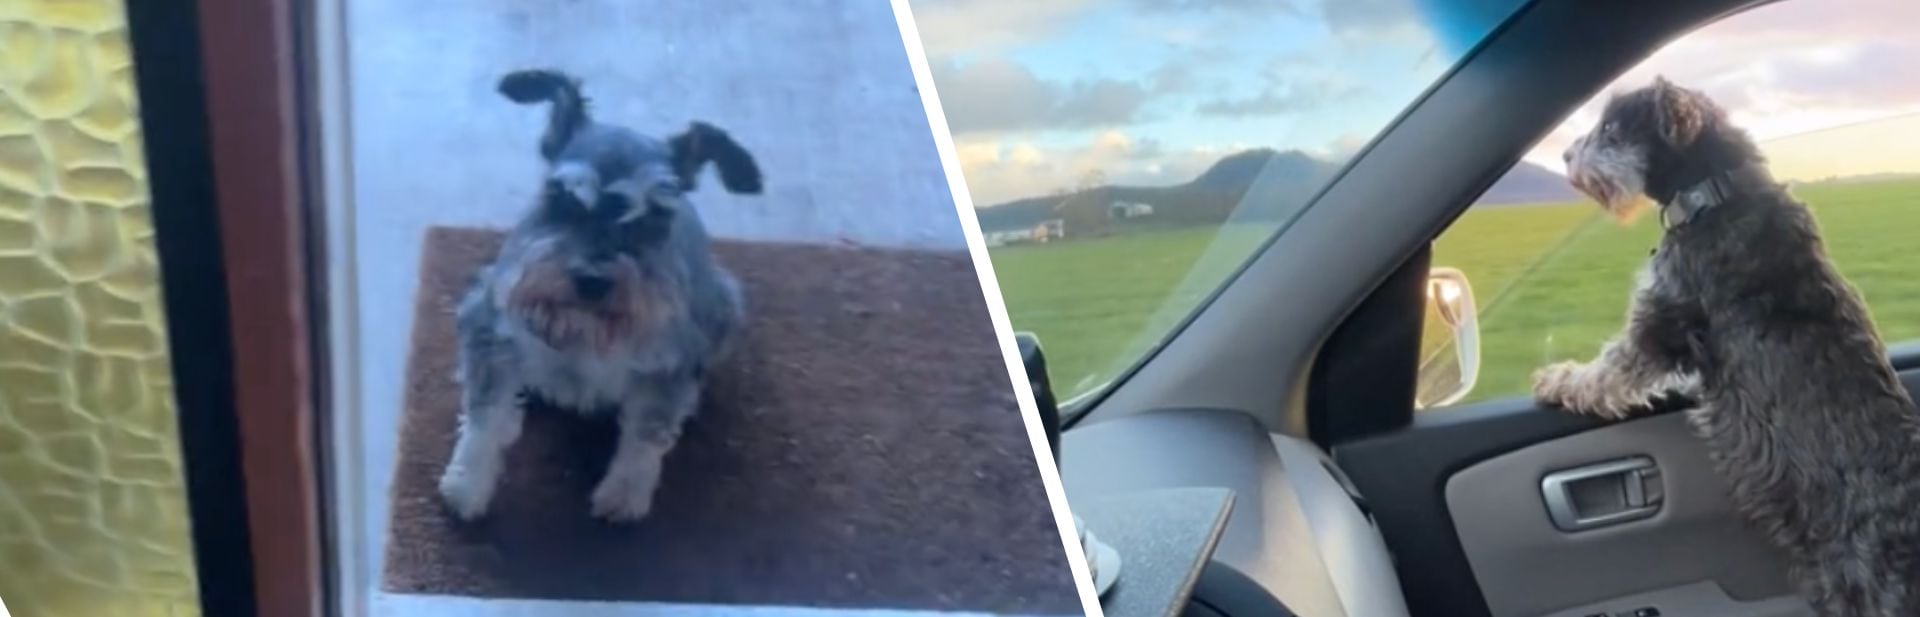 Old Schnauzer Brings Joy with His Half-mile Daily Walks to Childhood Owner